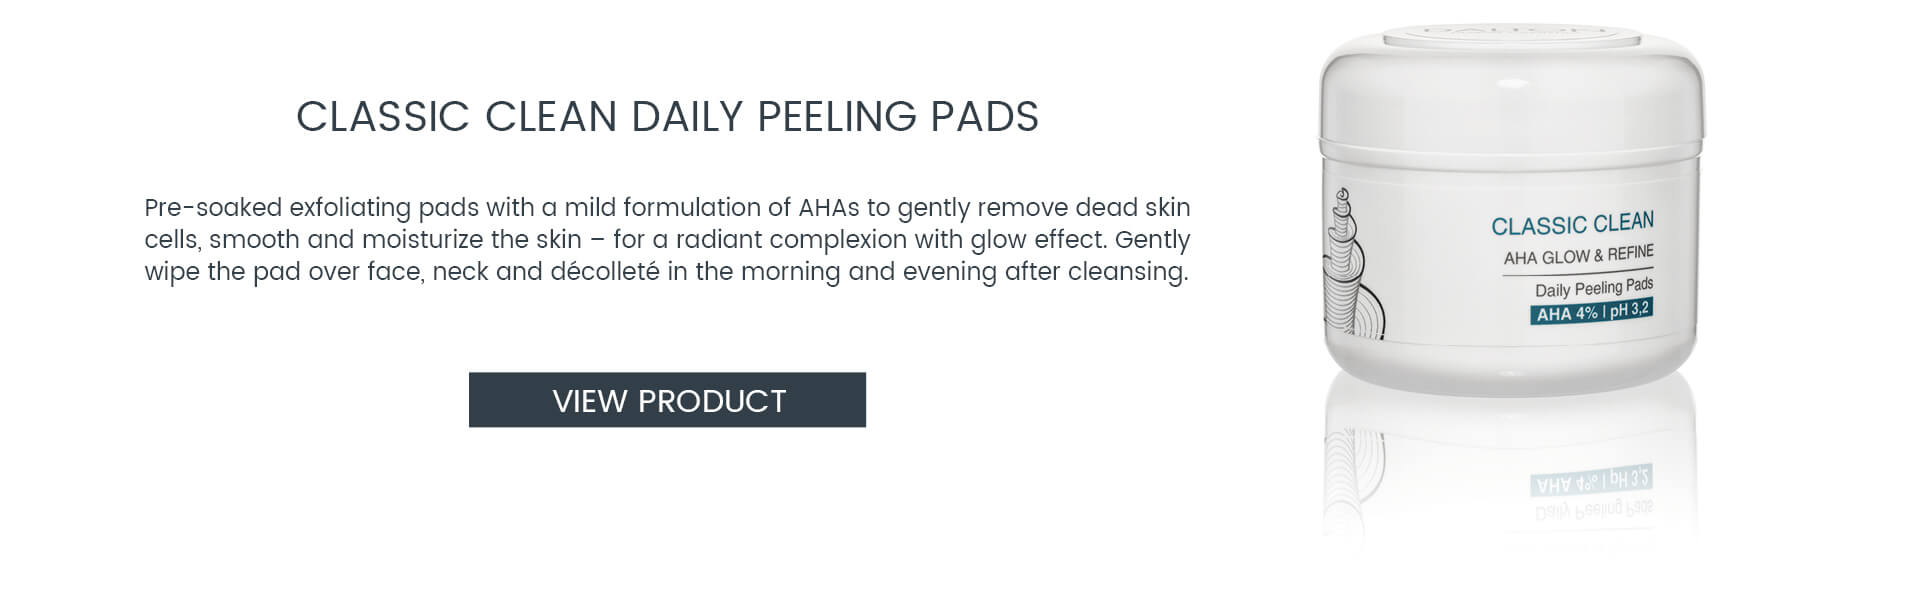 AHA Peeling Pads – Gentle AHA products for at-home use